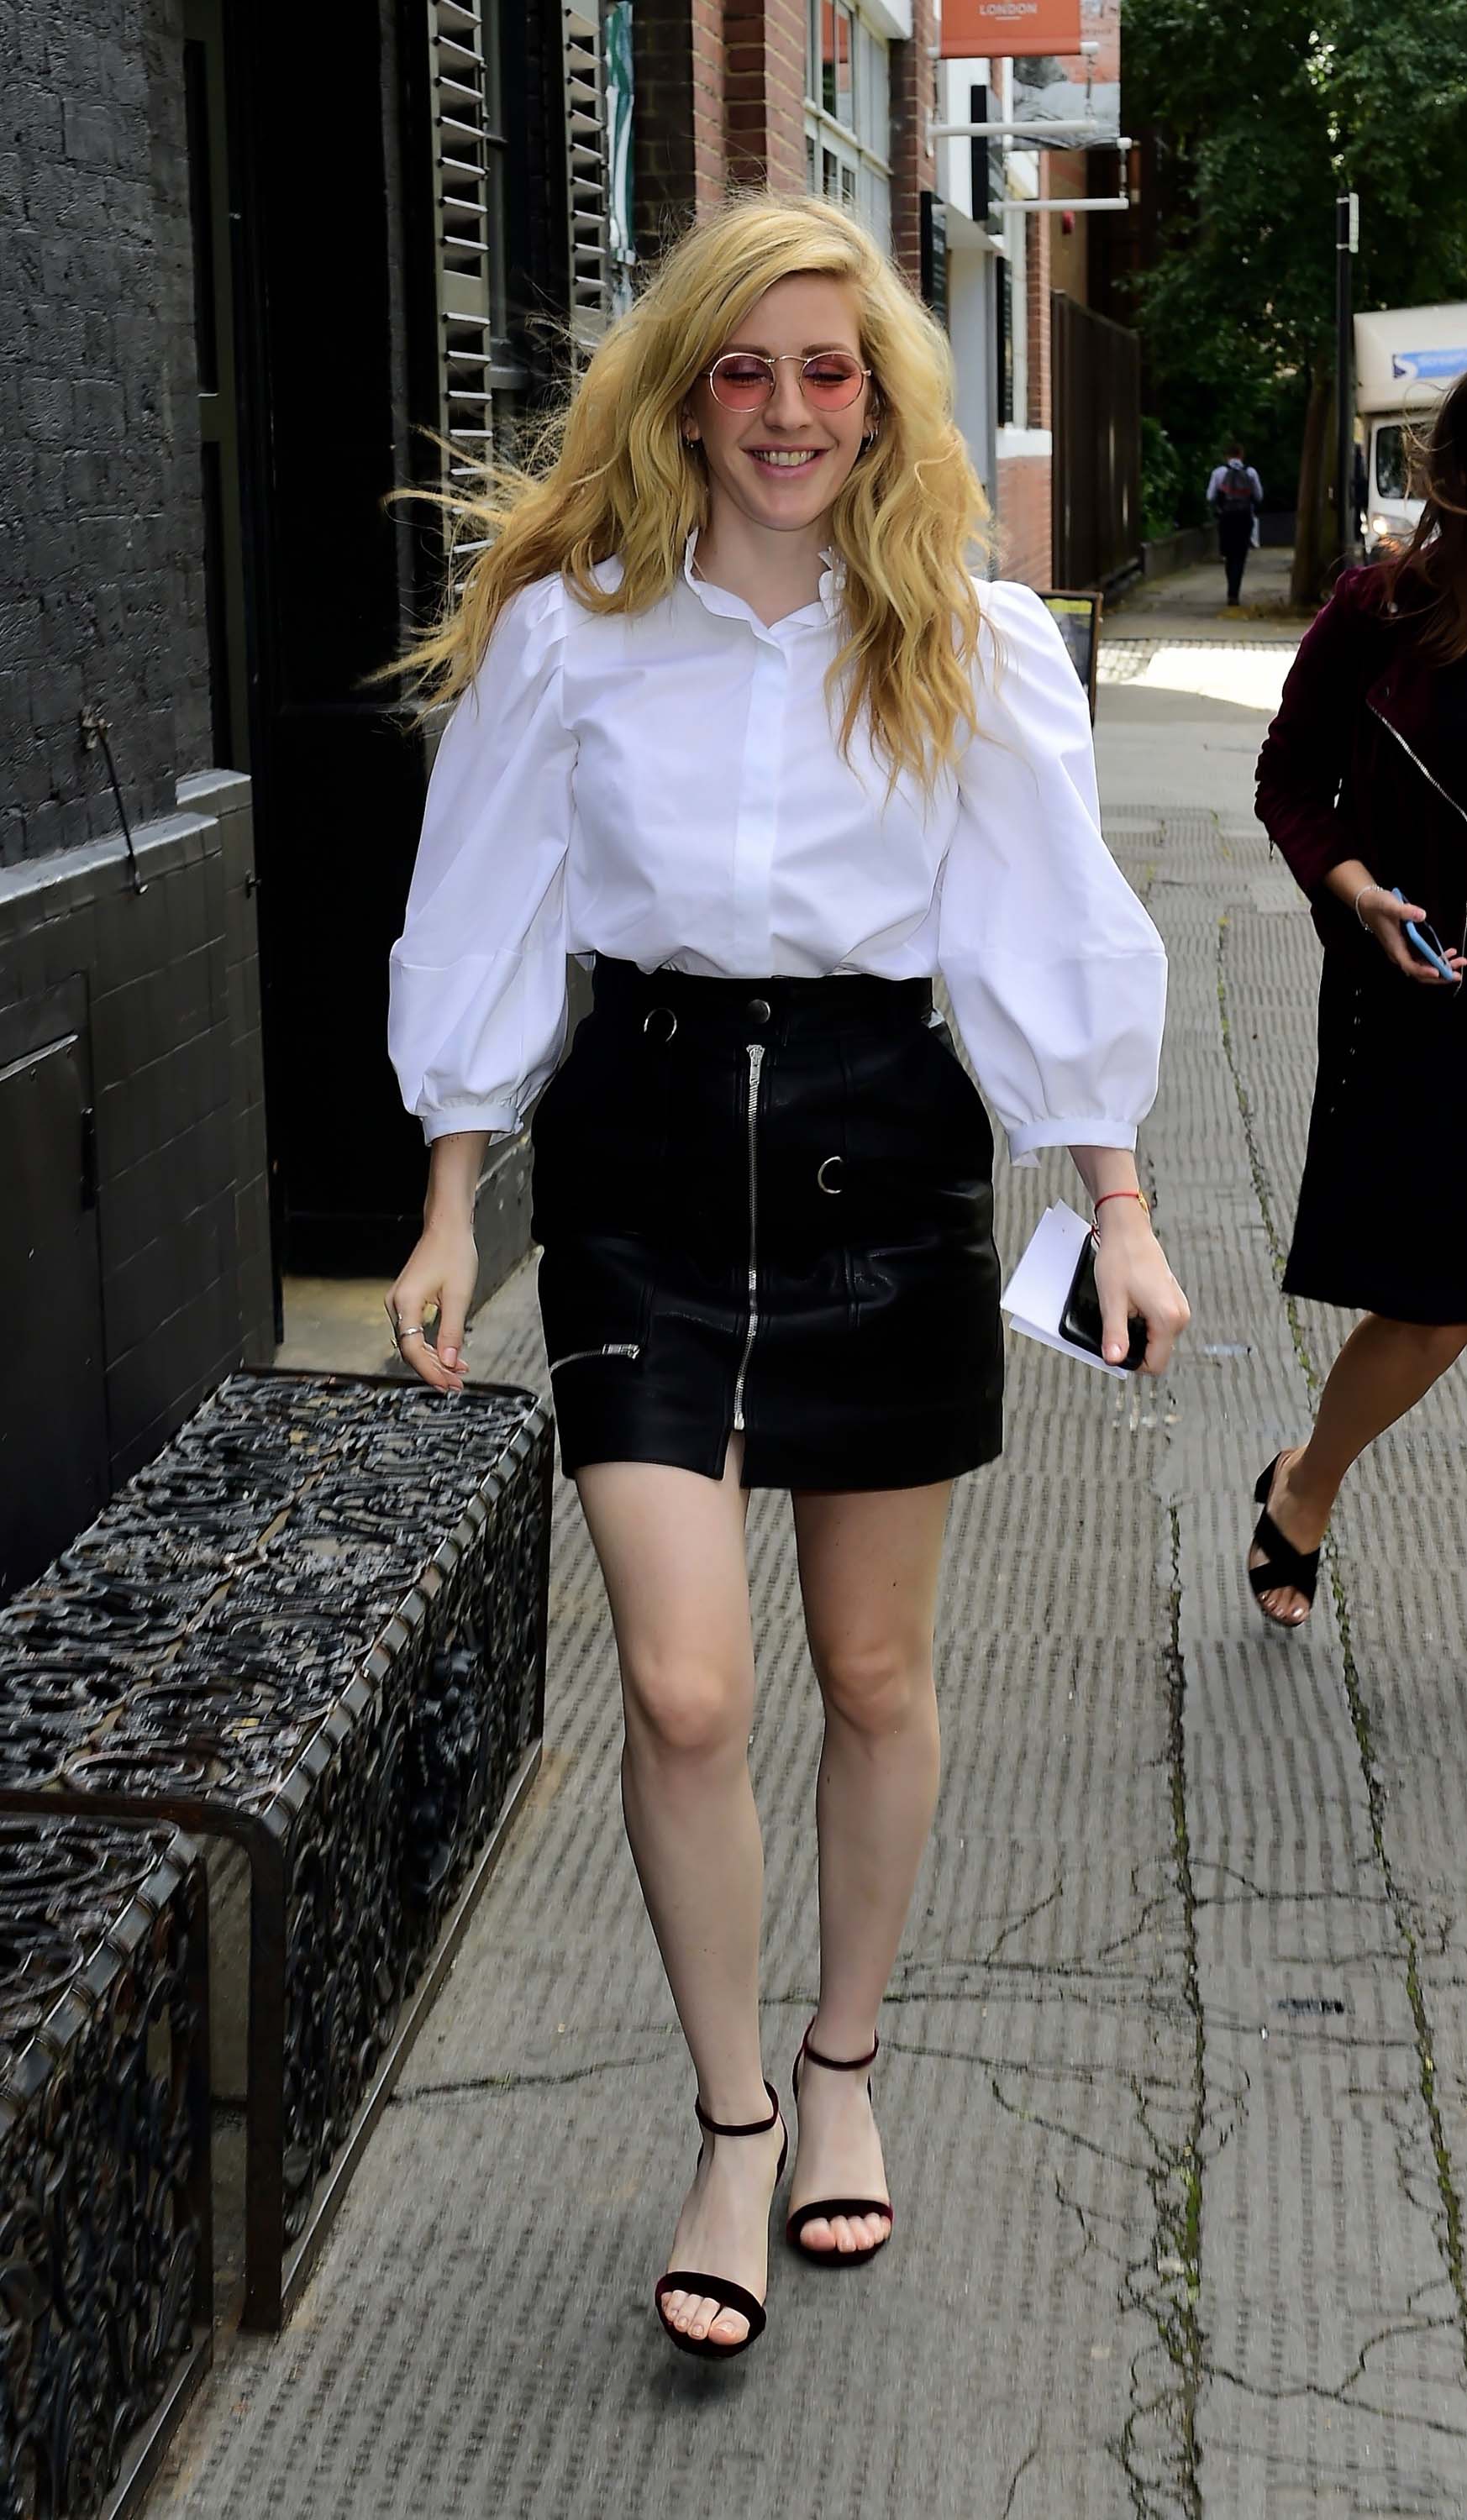 Ellie Goulding arriving at the Daisy London x Elle Goulding breakfast party